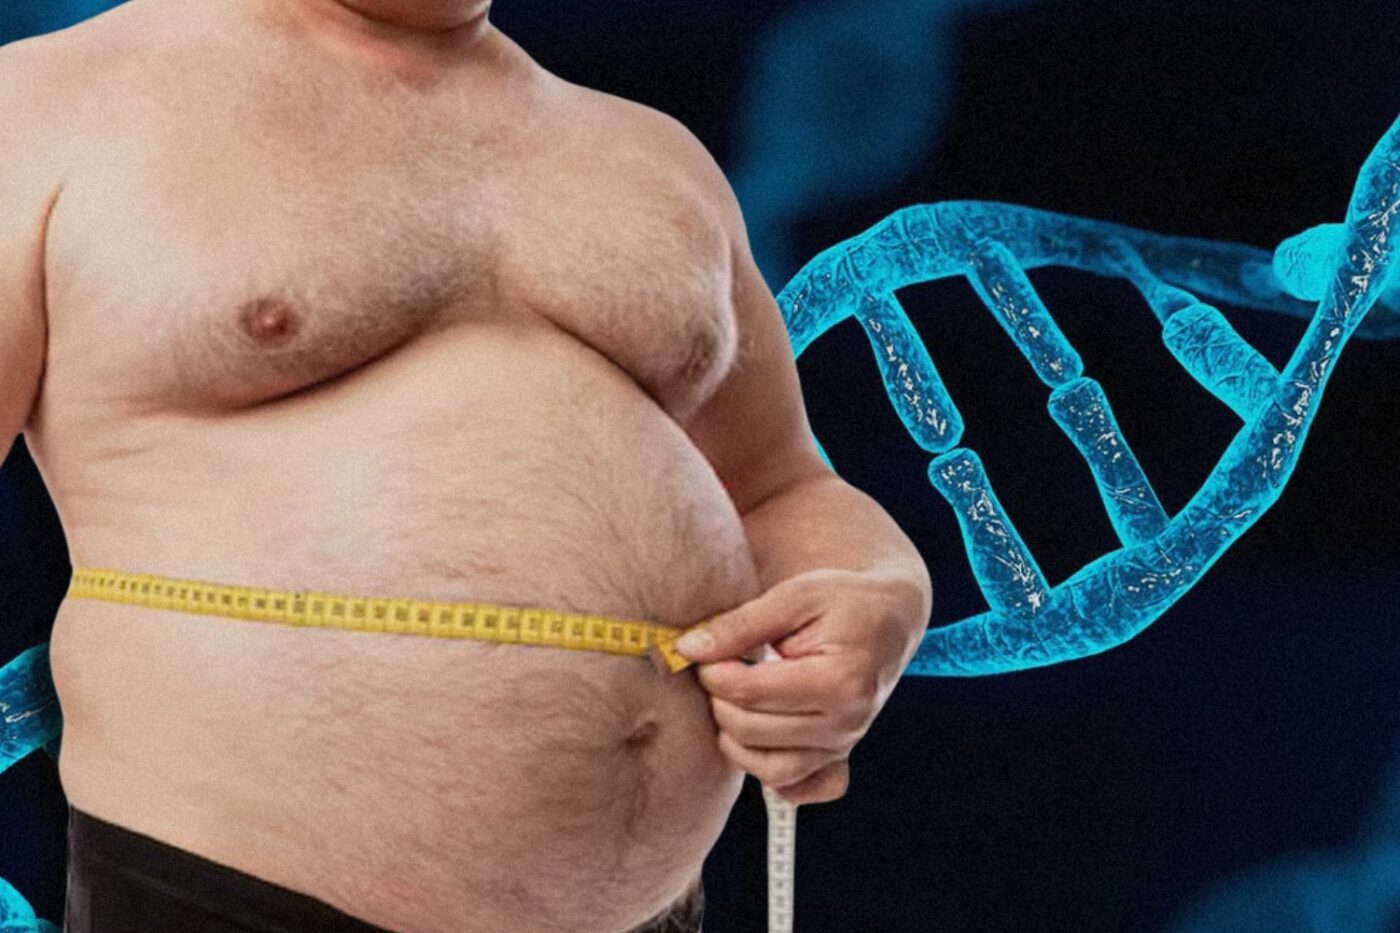 Scientists Discover Gene That Causes Increased Weight Gain From The Same Food